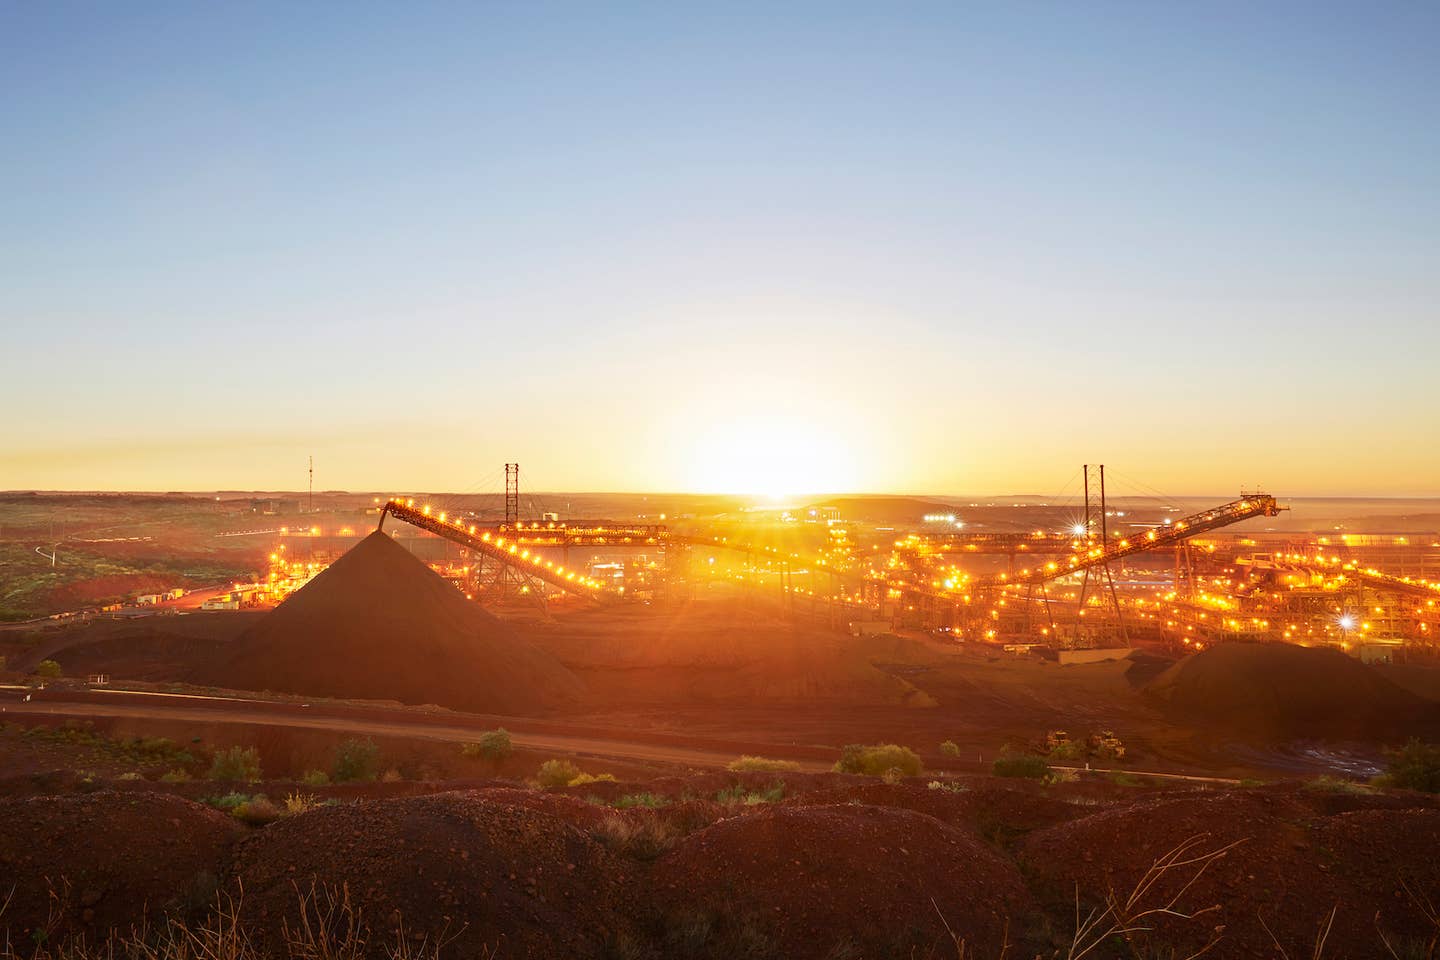 Cloudbreak Ore Processing Facility | Fortescue Metals Group